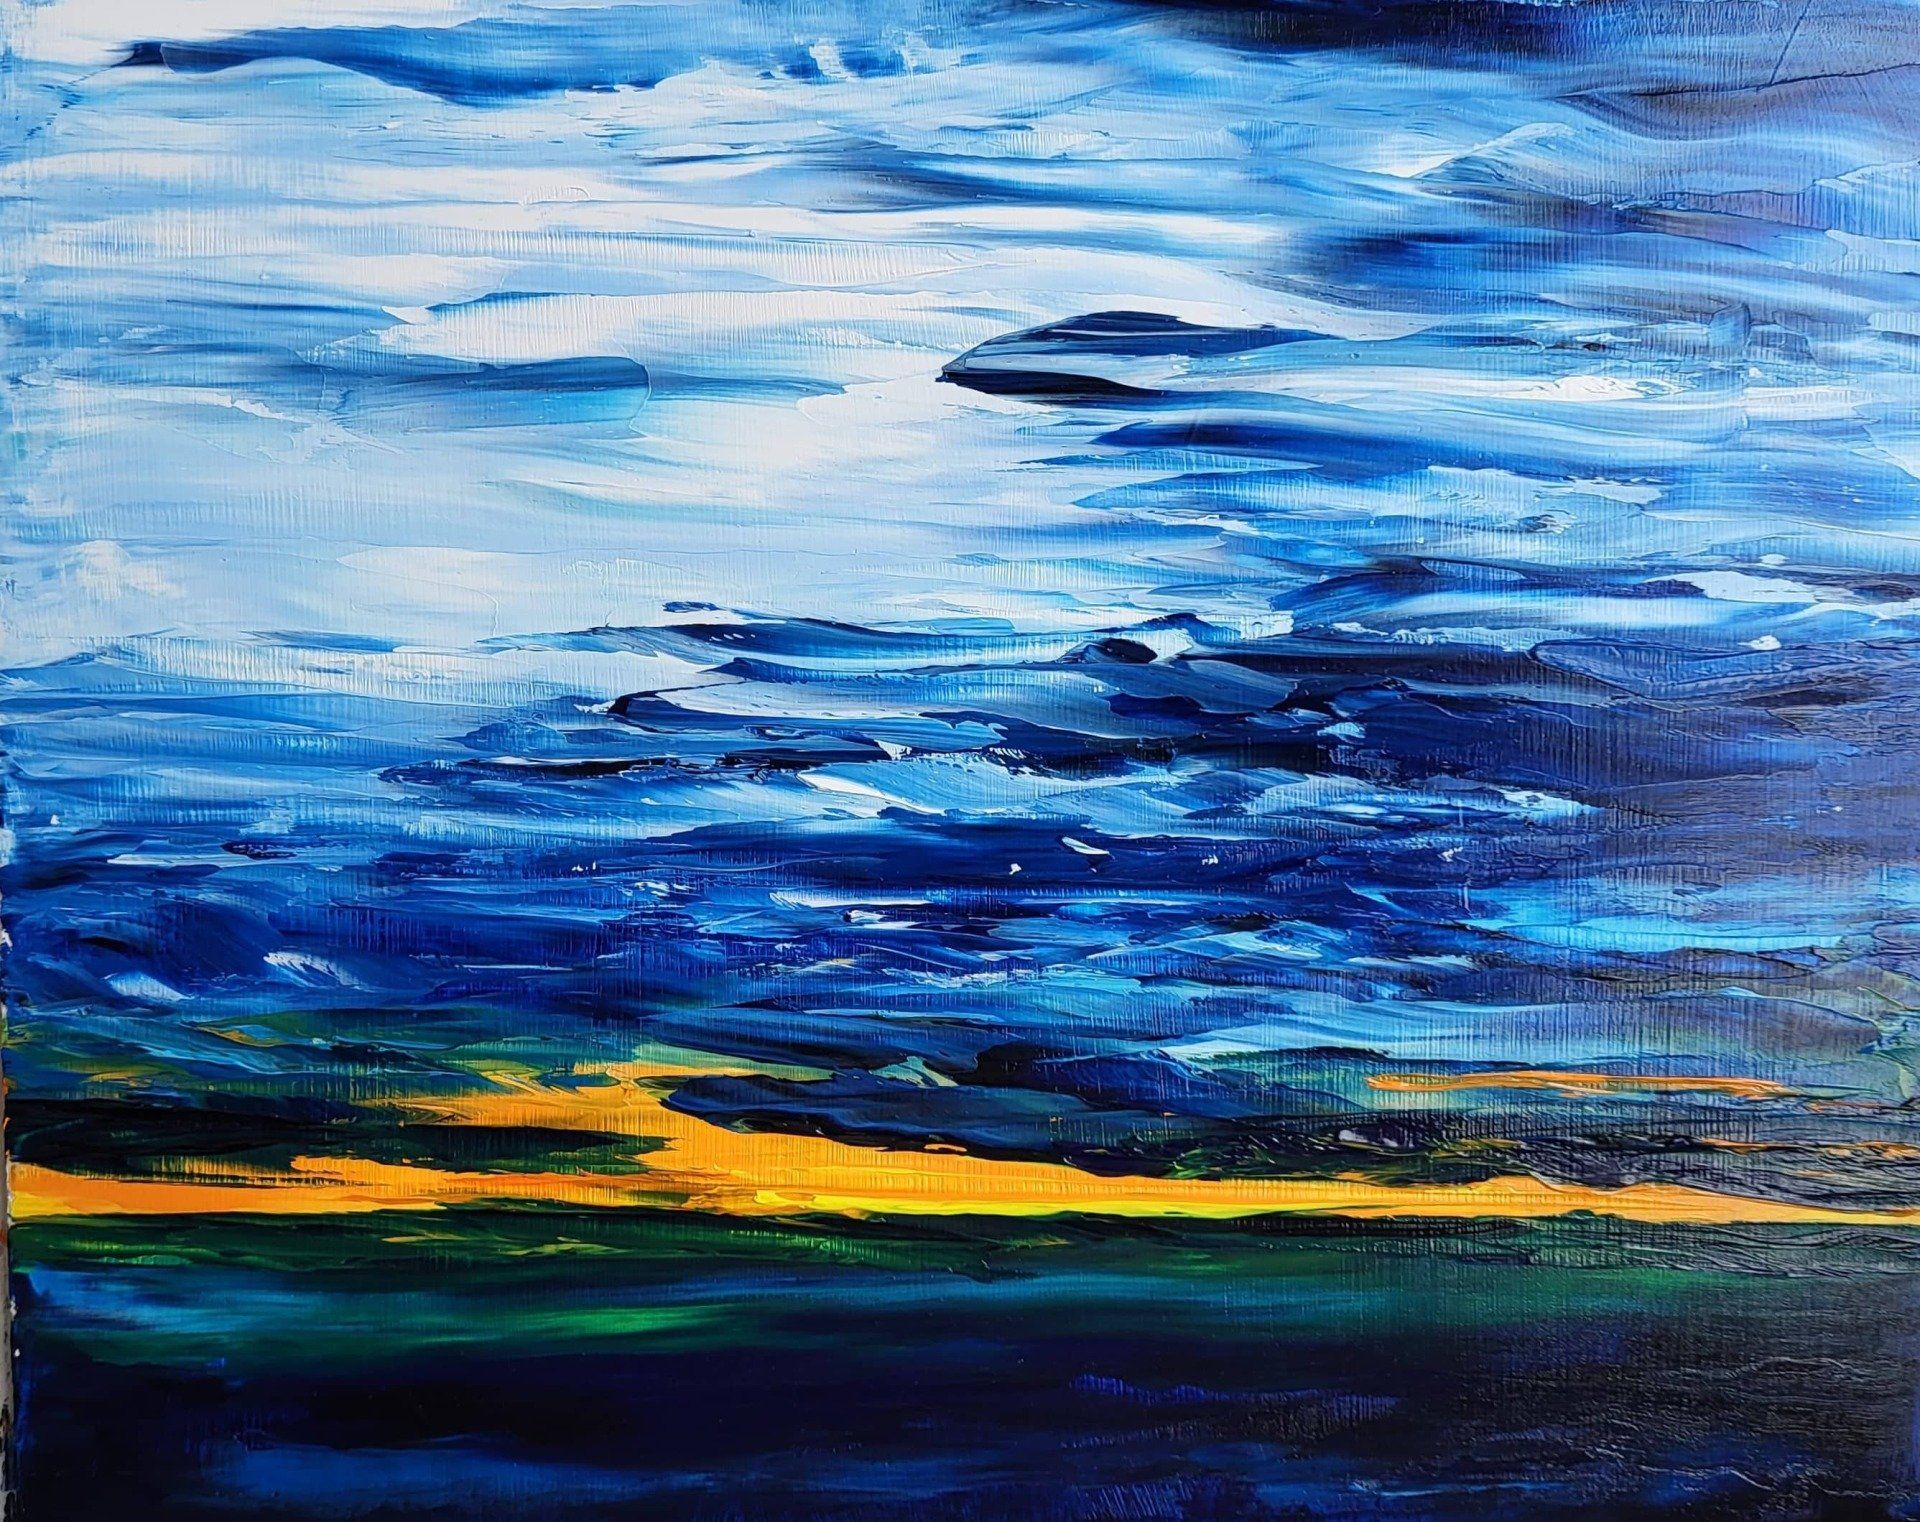 Last Light is an oil on Masonite 10 in. x 8 in. With the sun still brilliant in the impending night sky the orange and yellow final gasp creates a green shadow on the St. Laurent River in the Charlevoix region of Québec, Canada. There is a clearness of sky in upper two thirds of the painting. You know, though, nightfall is coming.